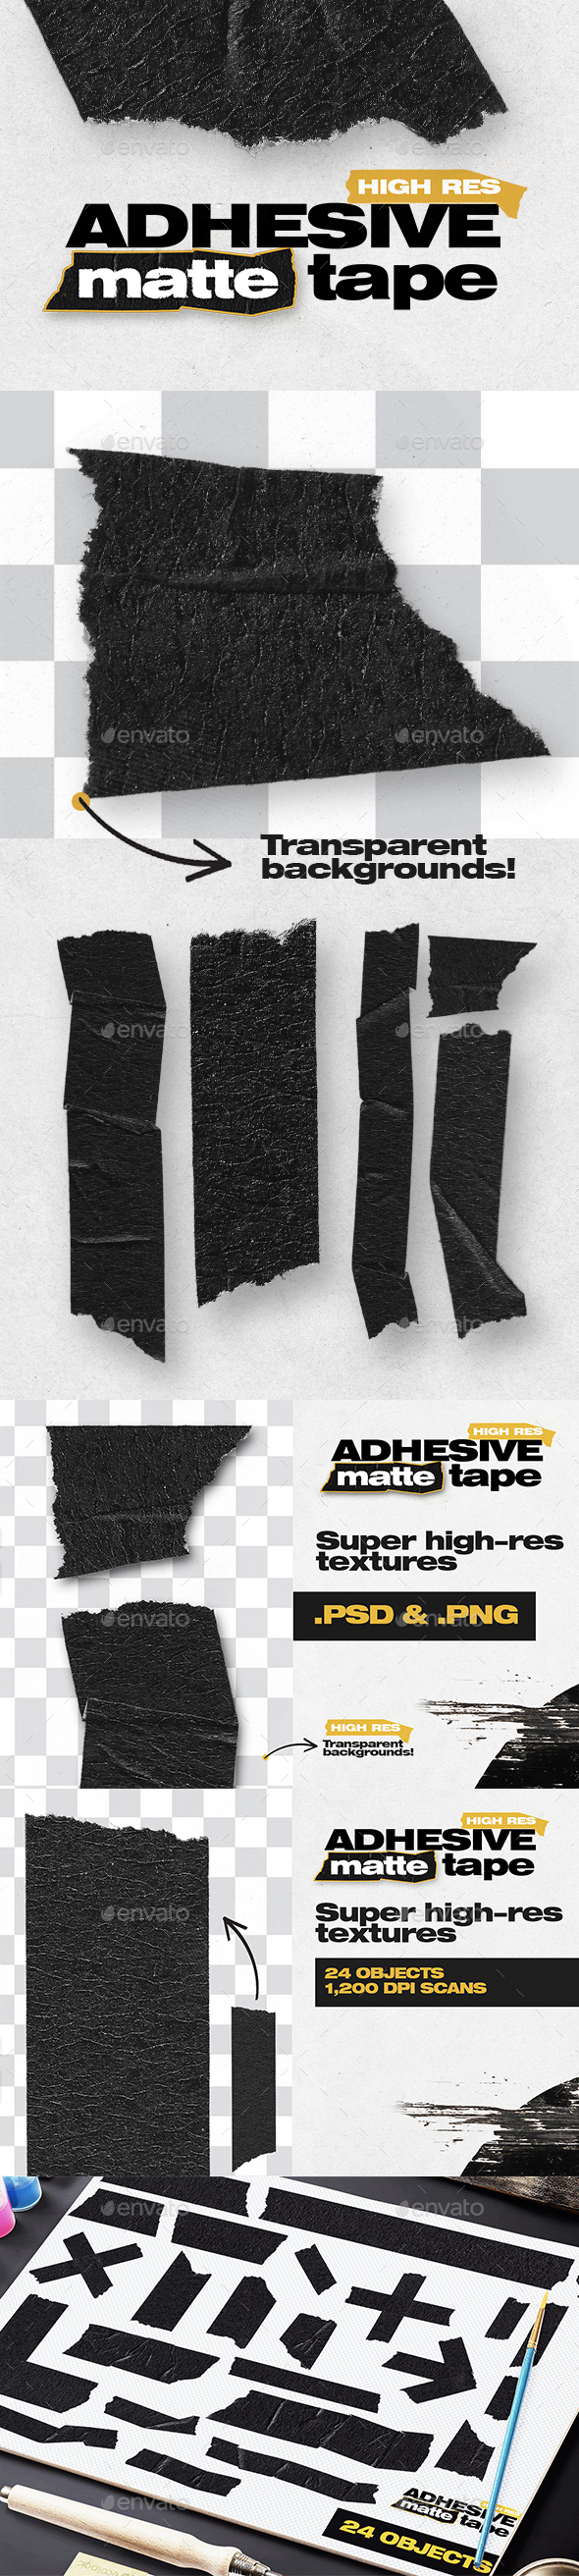 High Res Adhesive Matte Tape Objects